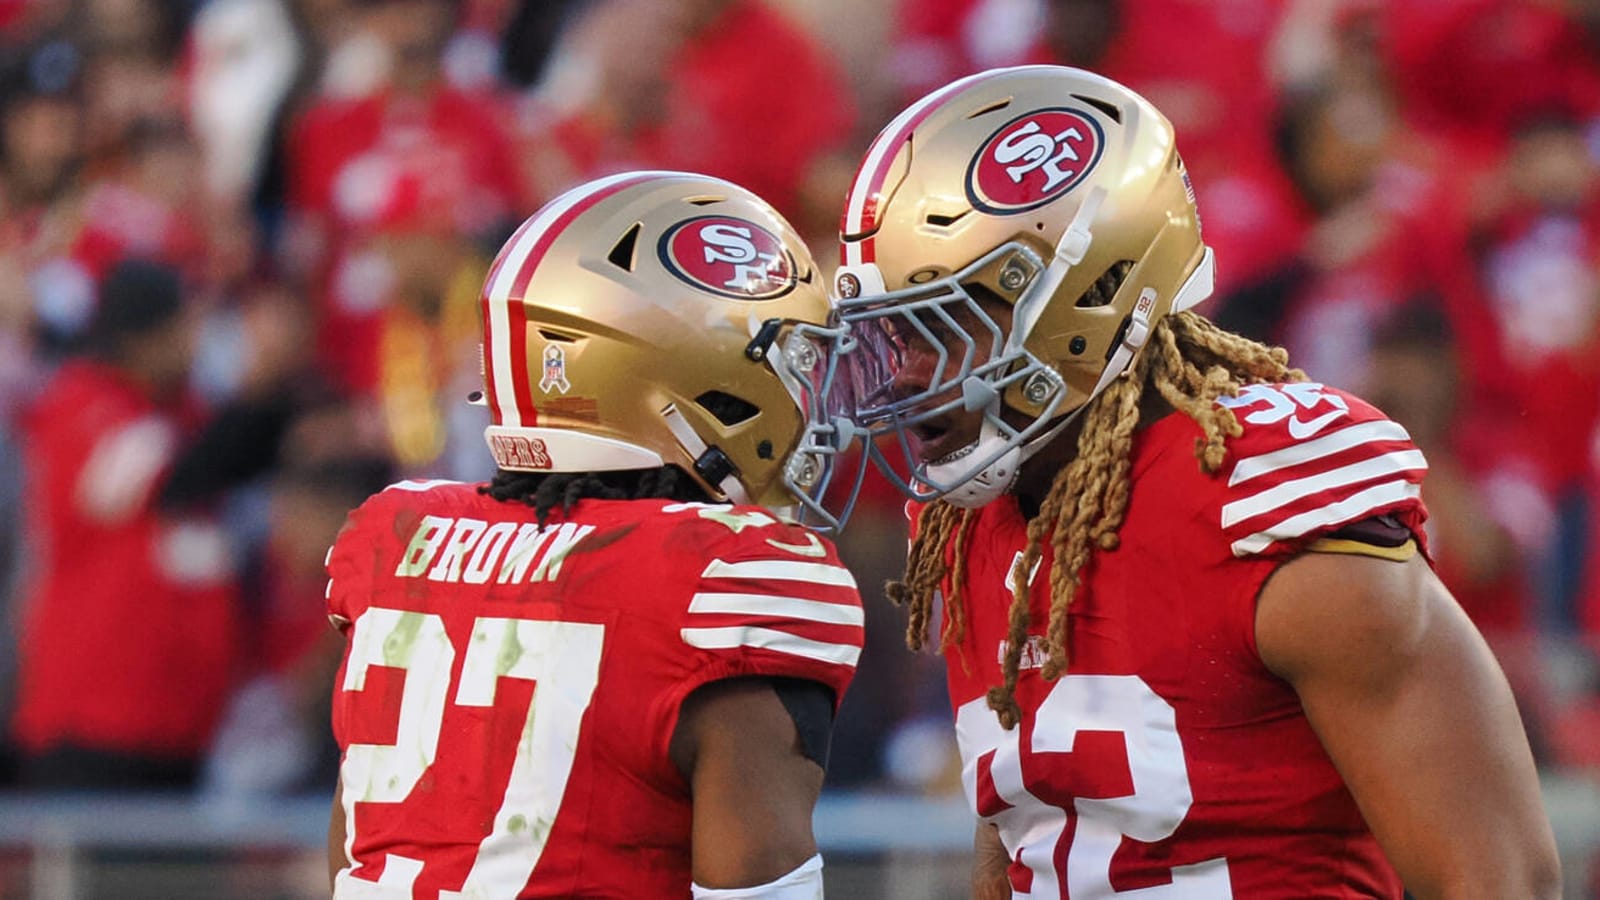 Season-ending injury to 49ers safety an opportunity for top pick